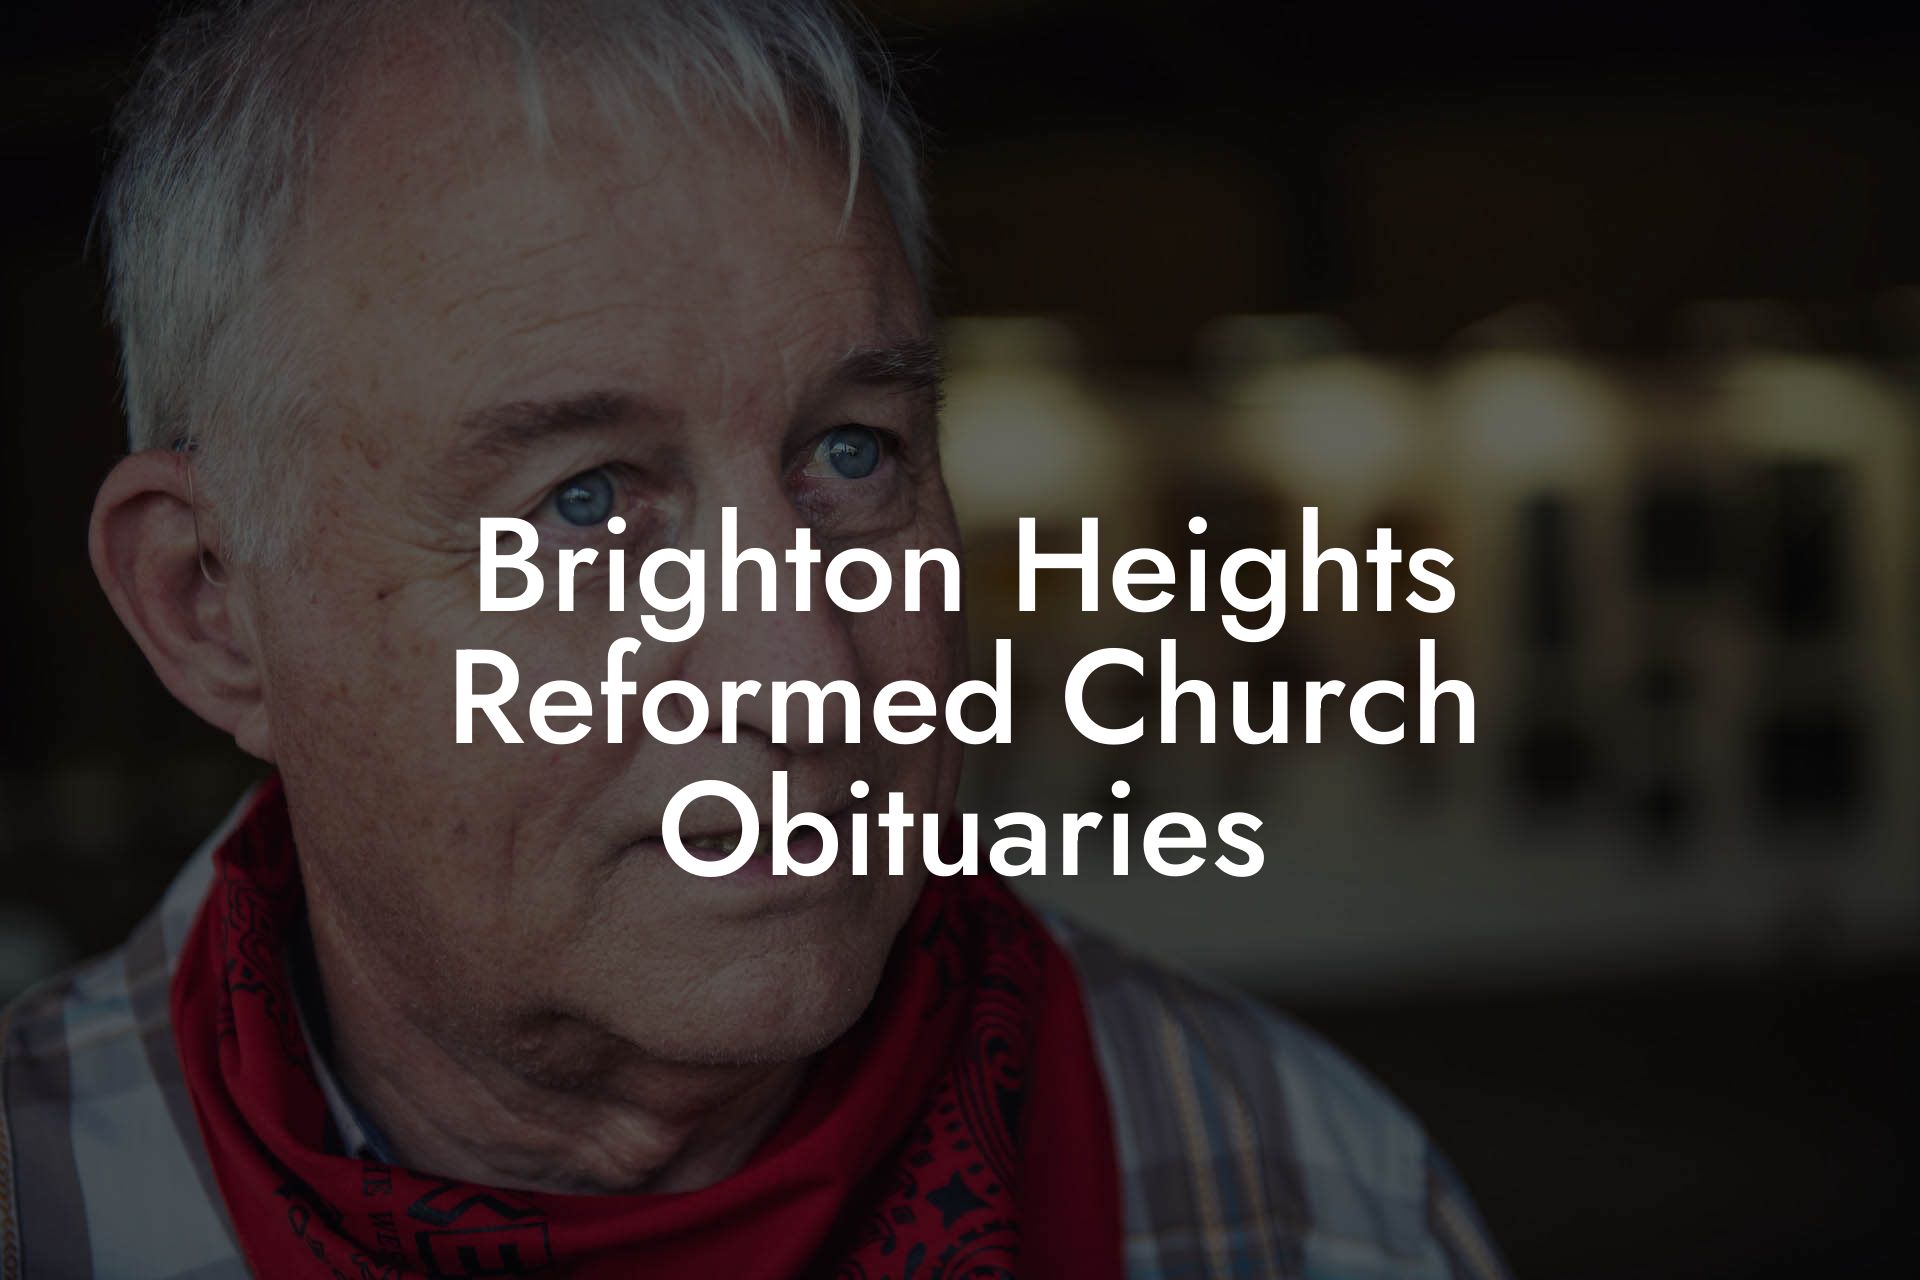 Brighton Heights Reformed Church Obituaries